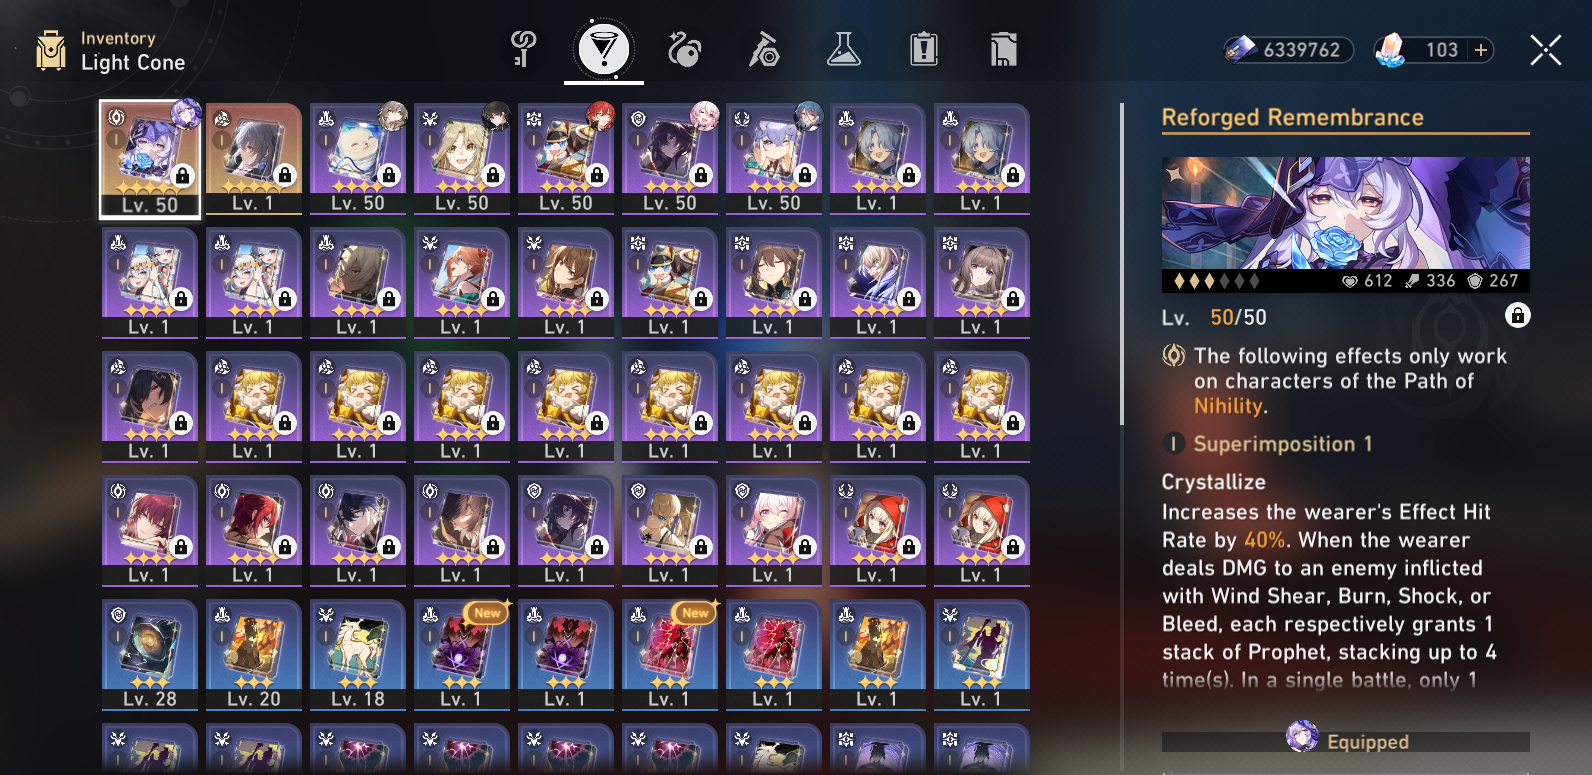 NA|TL40|Black Swan E1, Dr. Ratio, Himeko, Gepard|Reforged Remembrance, But the Battle Isnt Over||Instant delivery [RR1146]